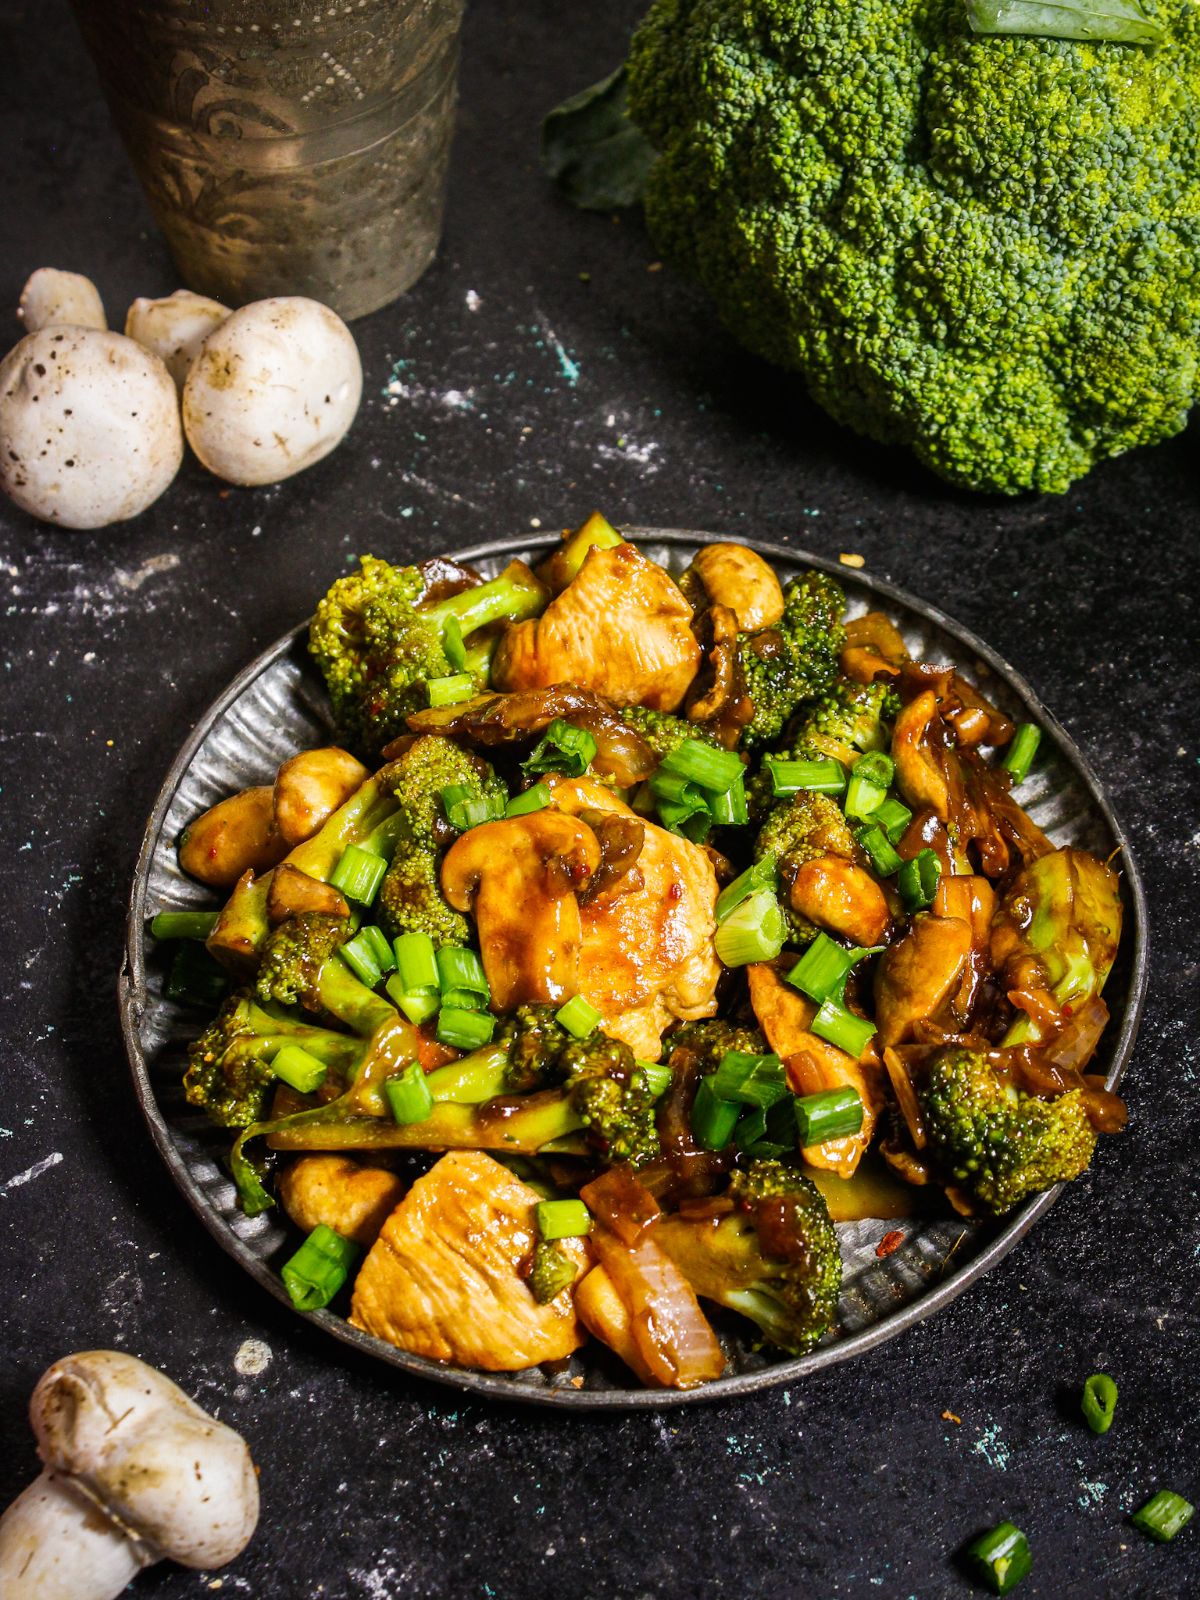 Chicken Broccoli Stir Fry with raw broccoli and mushrooms in the background